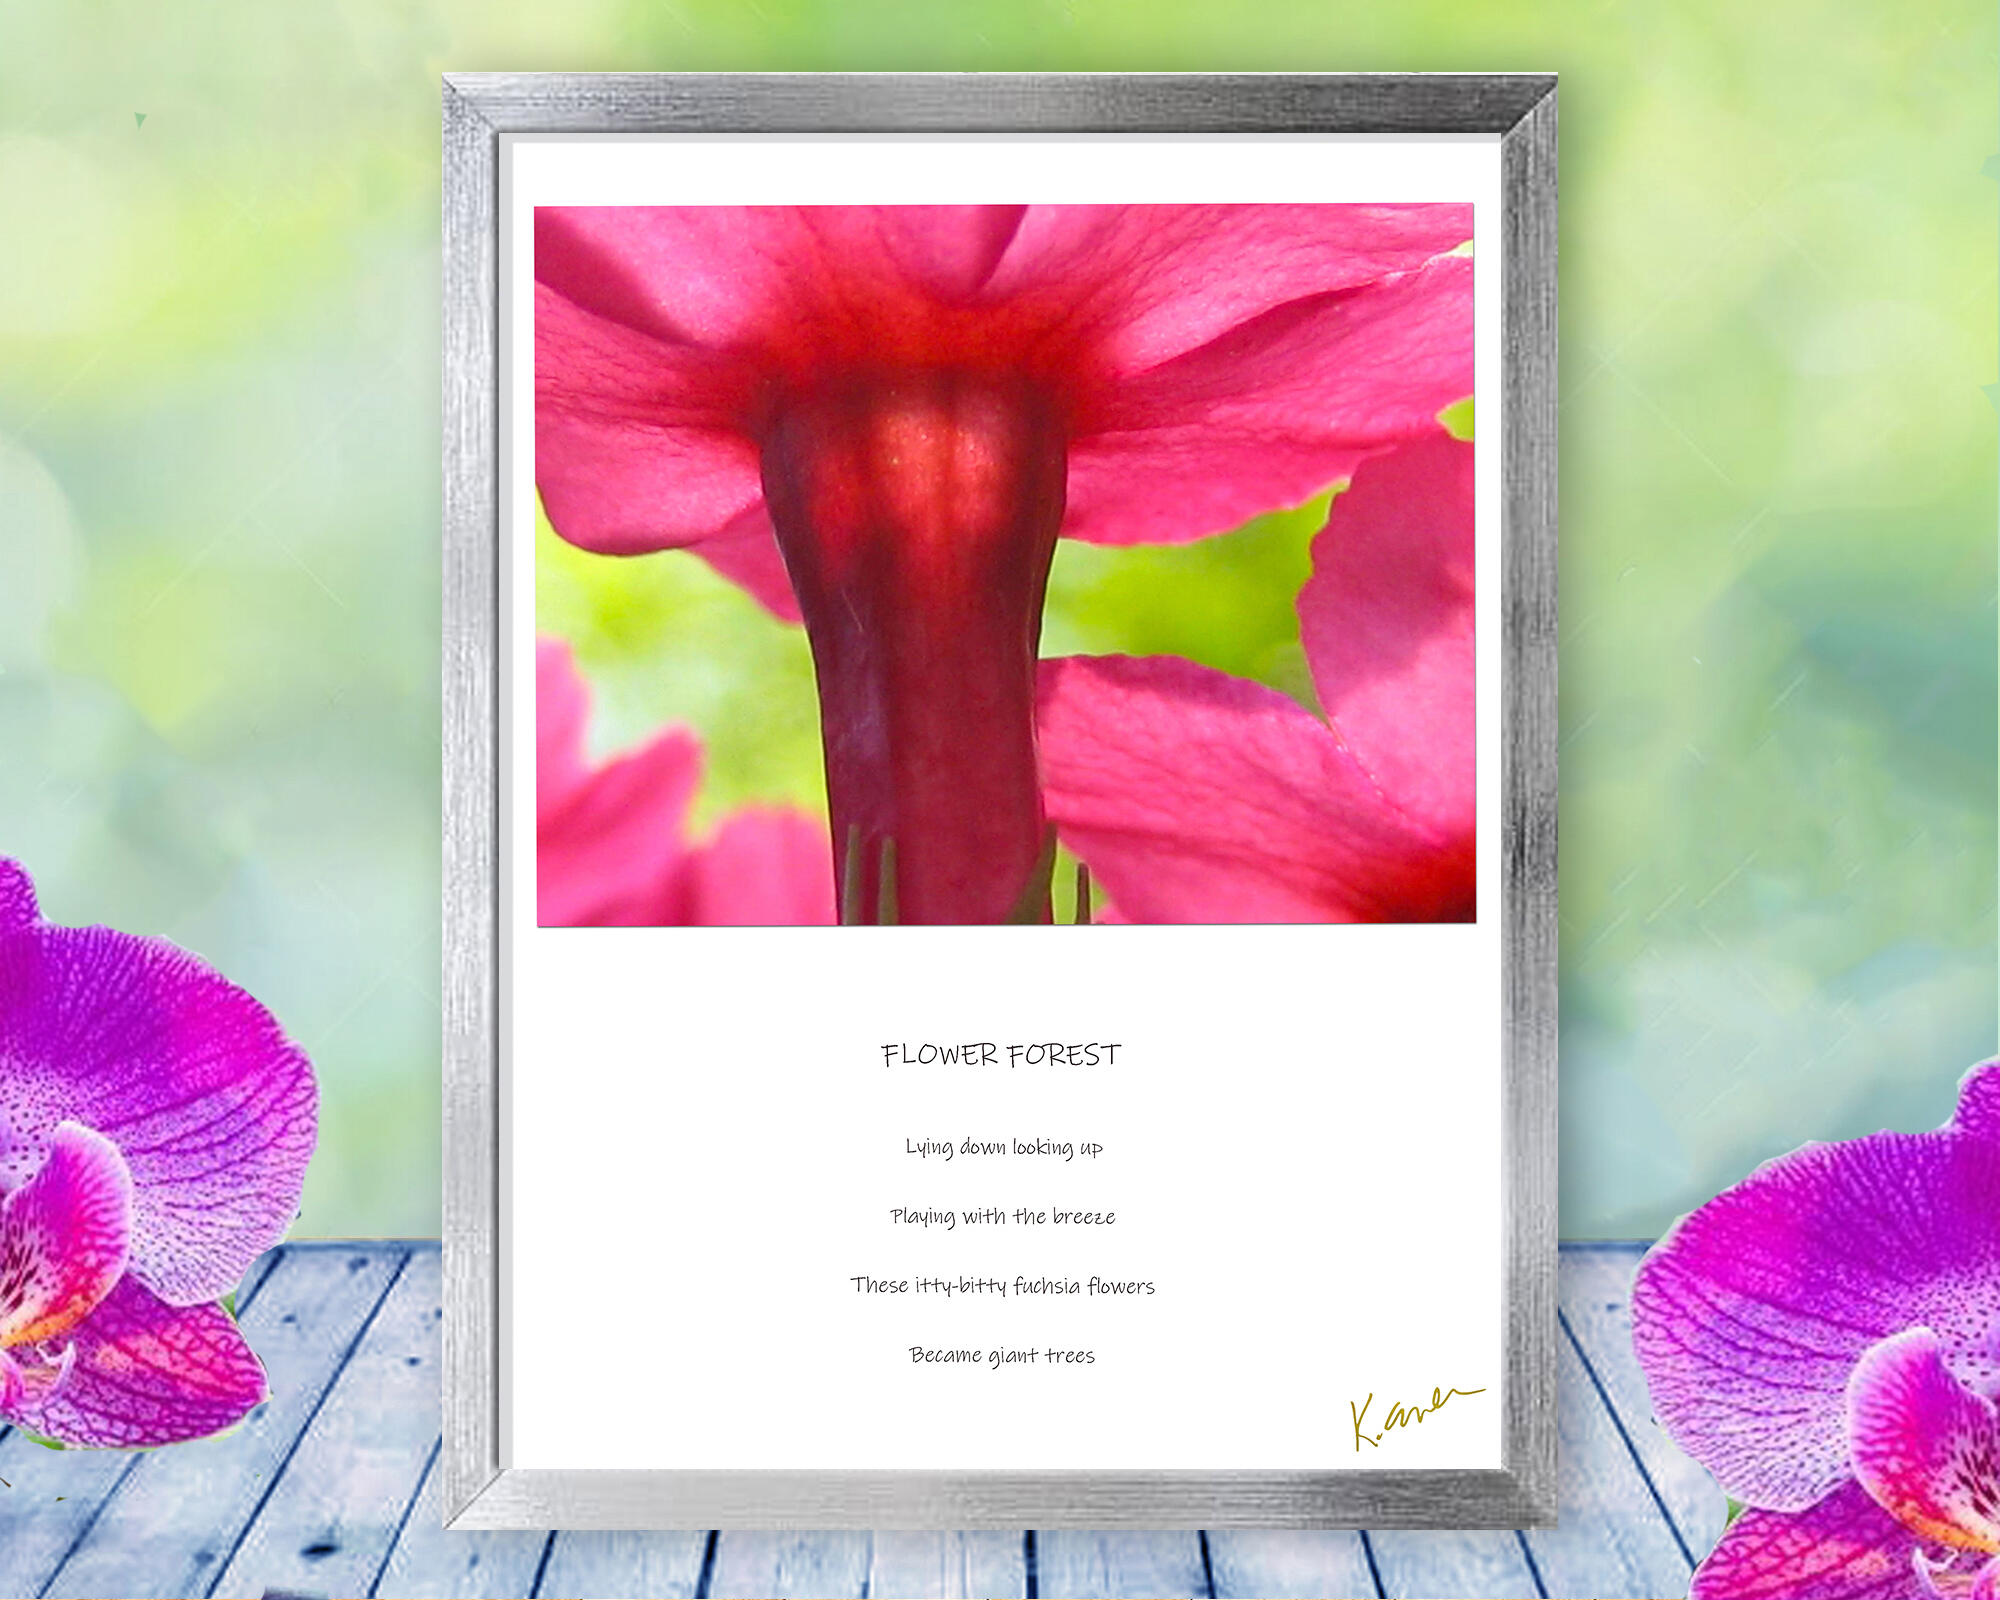 Beautiful pink blossoms tower overhead in this happy, magical, nature photograph. Print with Poem - Flower Forest - by The Poetry of Nature